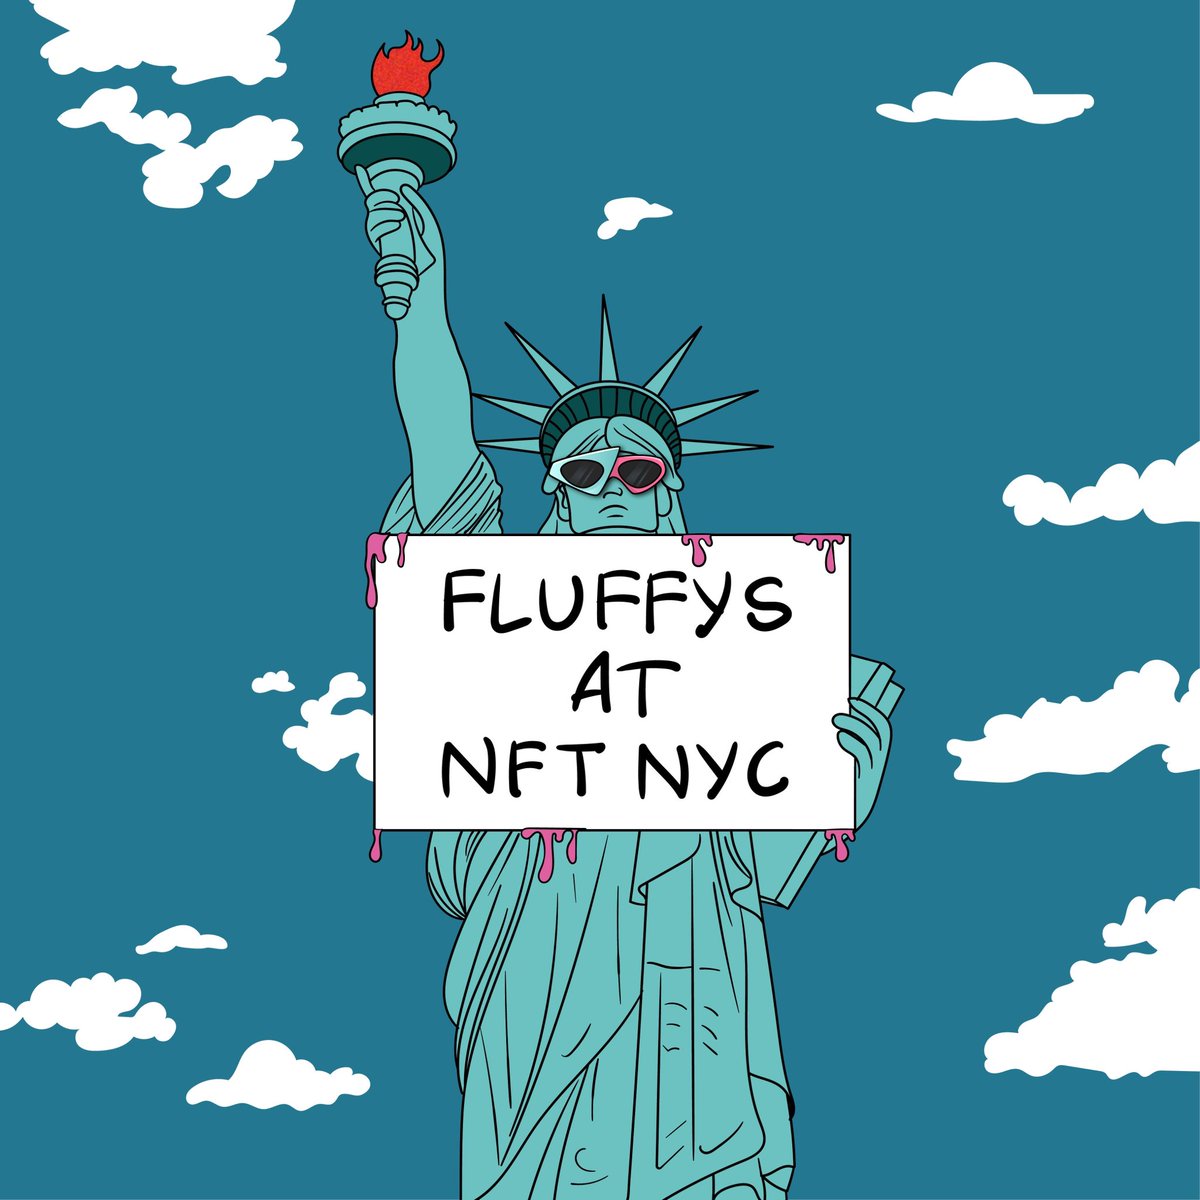 FLUFFYS AT NFT NYC!🗽 Find us to grab one of our 100 exclusive wristbands that will grant you access to a free mint. ✨ Probably nothing